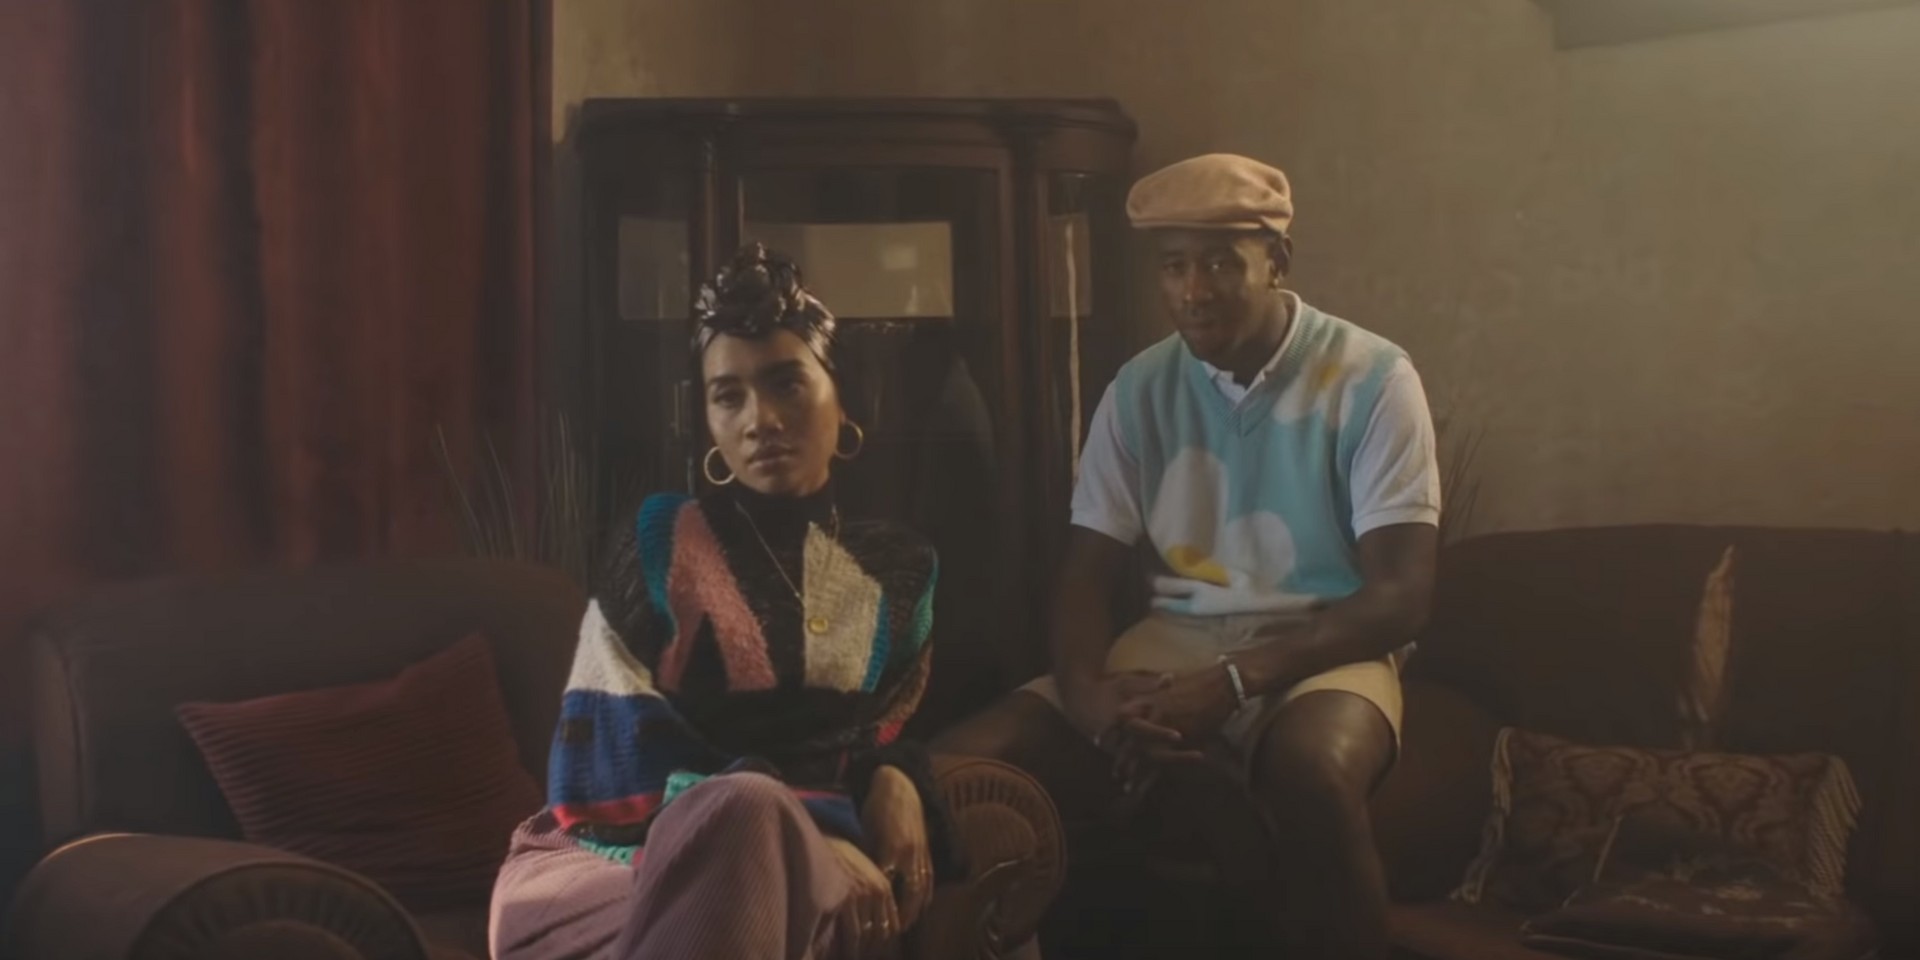 Yuna and Tyler, The Creator link up for 'Castaway' music video 